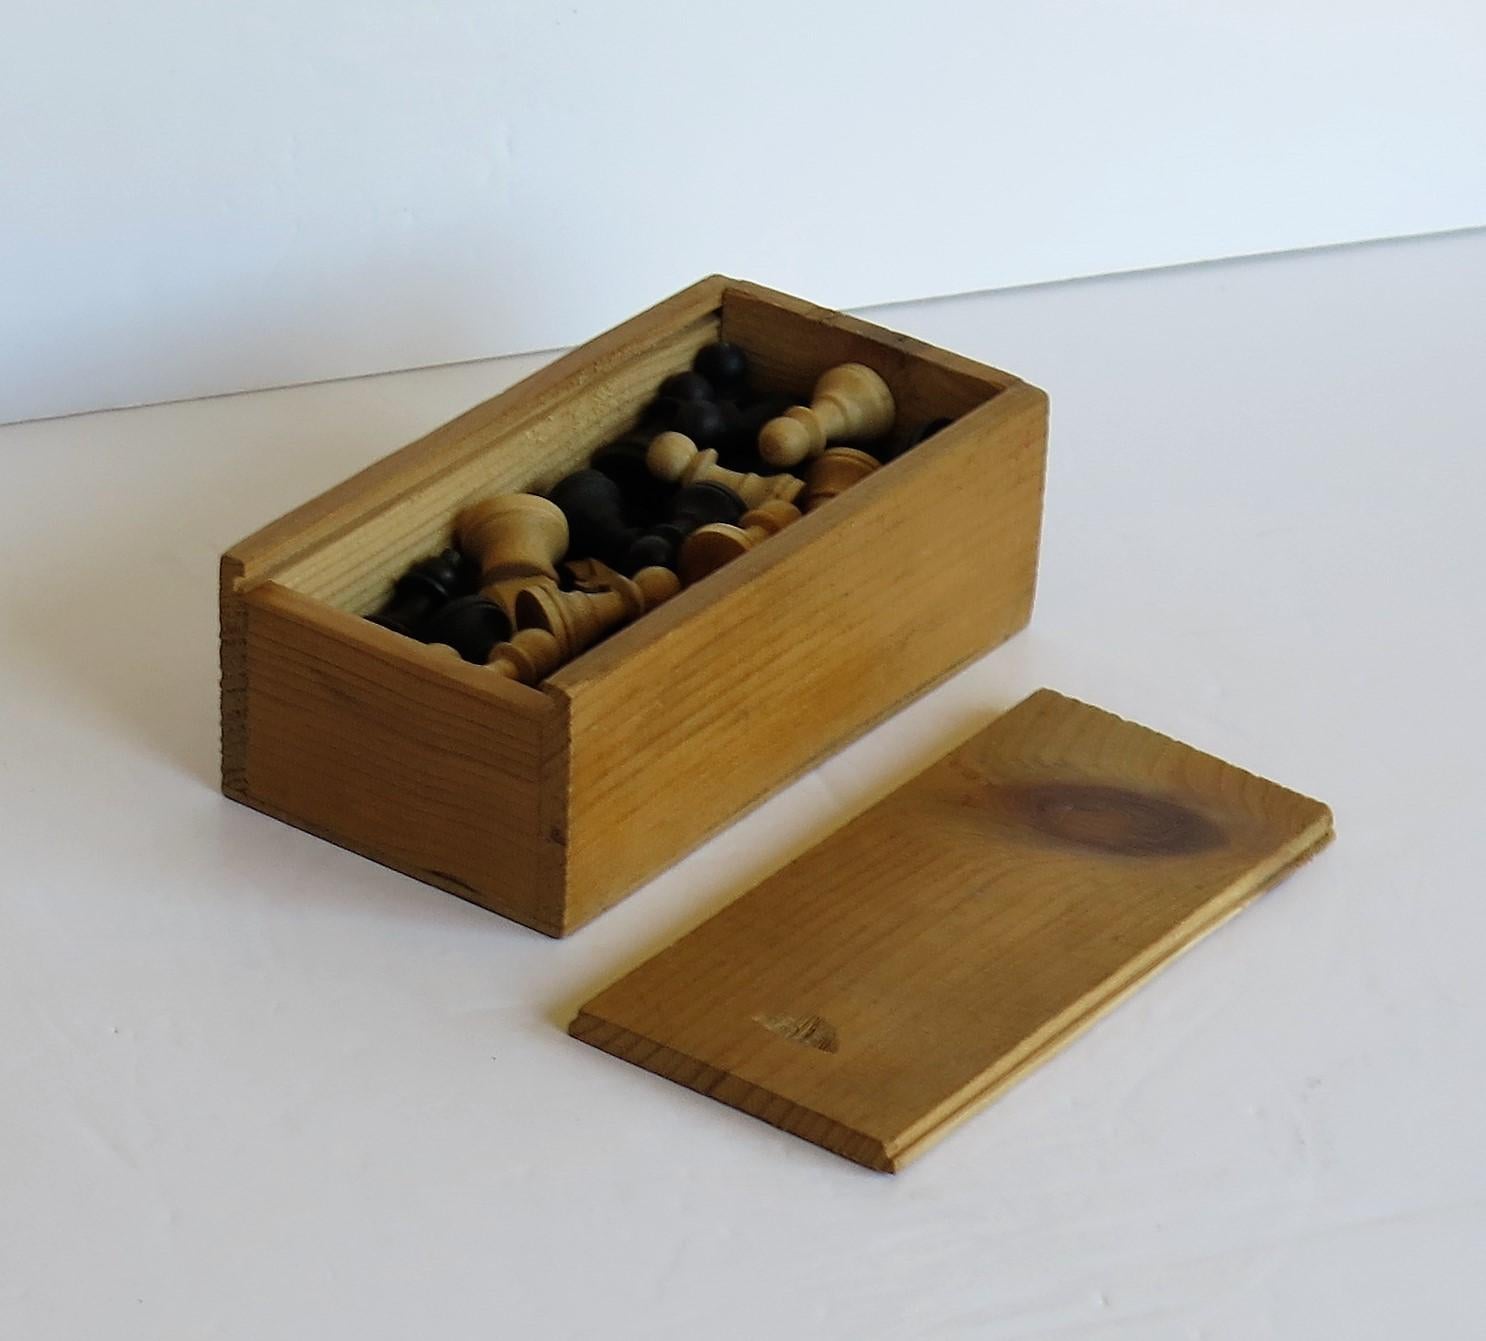 20th Century Handmade Wood Complete Chess Set Game in Pine Lidded Box, circa 1930